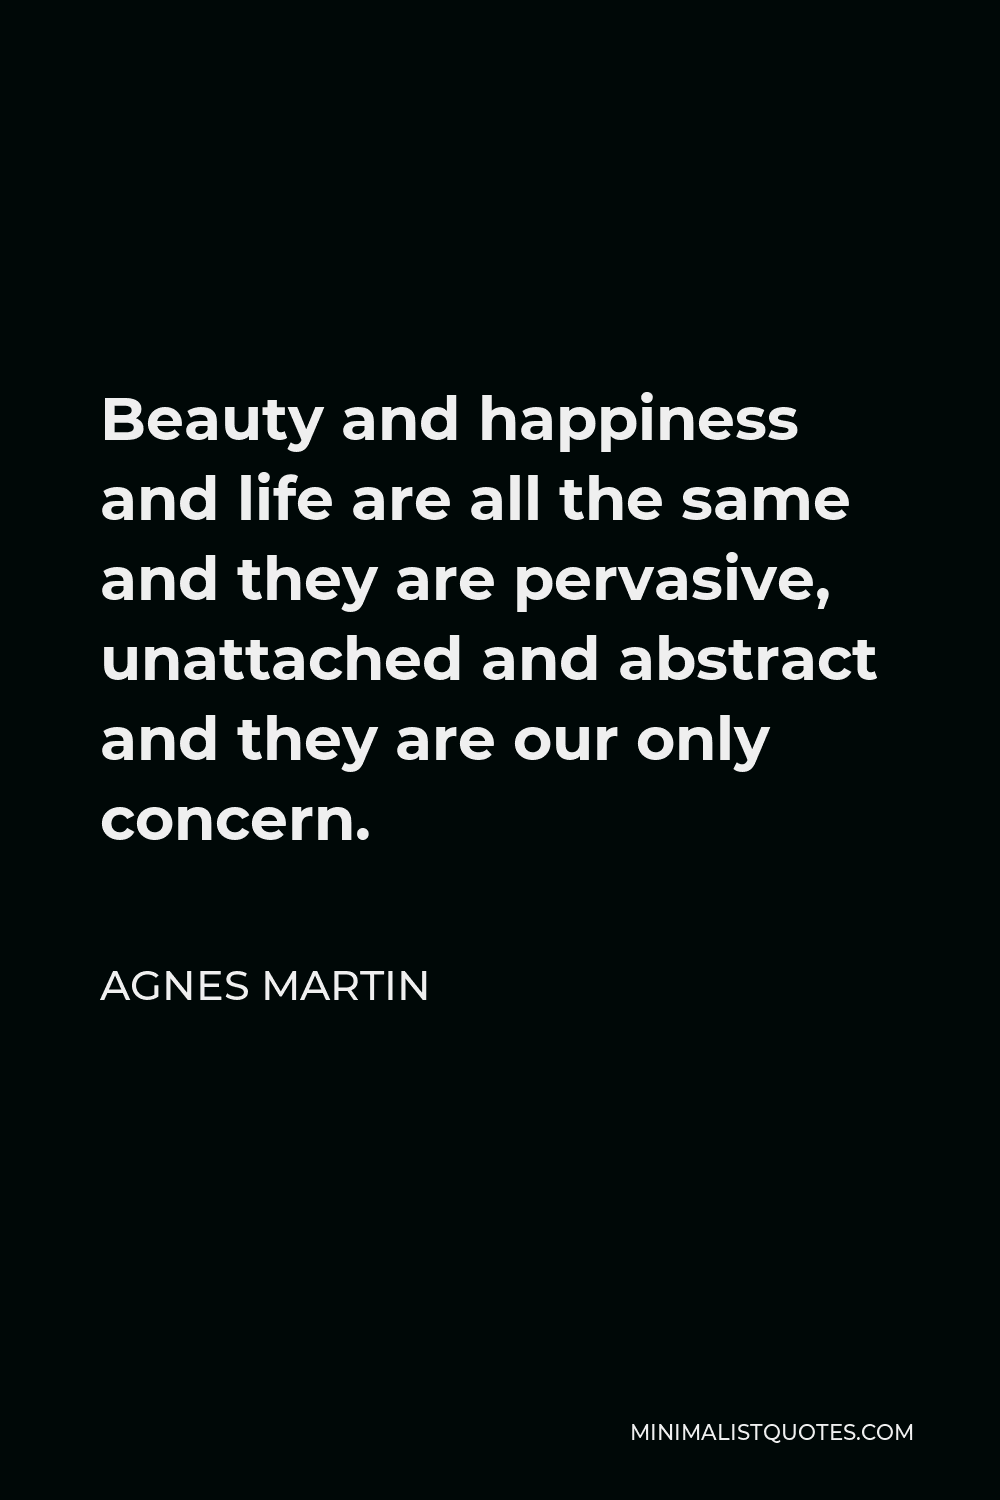 Agnes Martin Quote - Beauty and happiness and life are all the same and they are pervasive, unattached and abstract and they are our only concern.